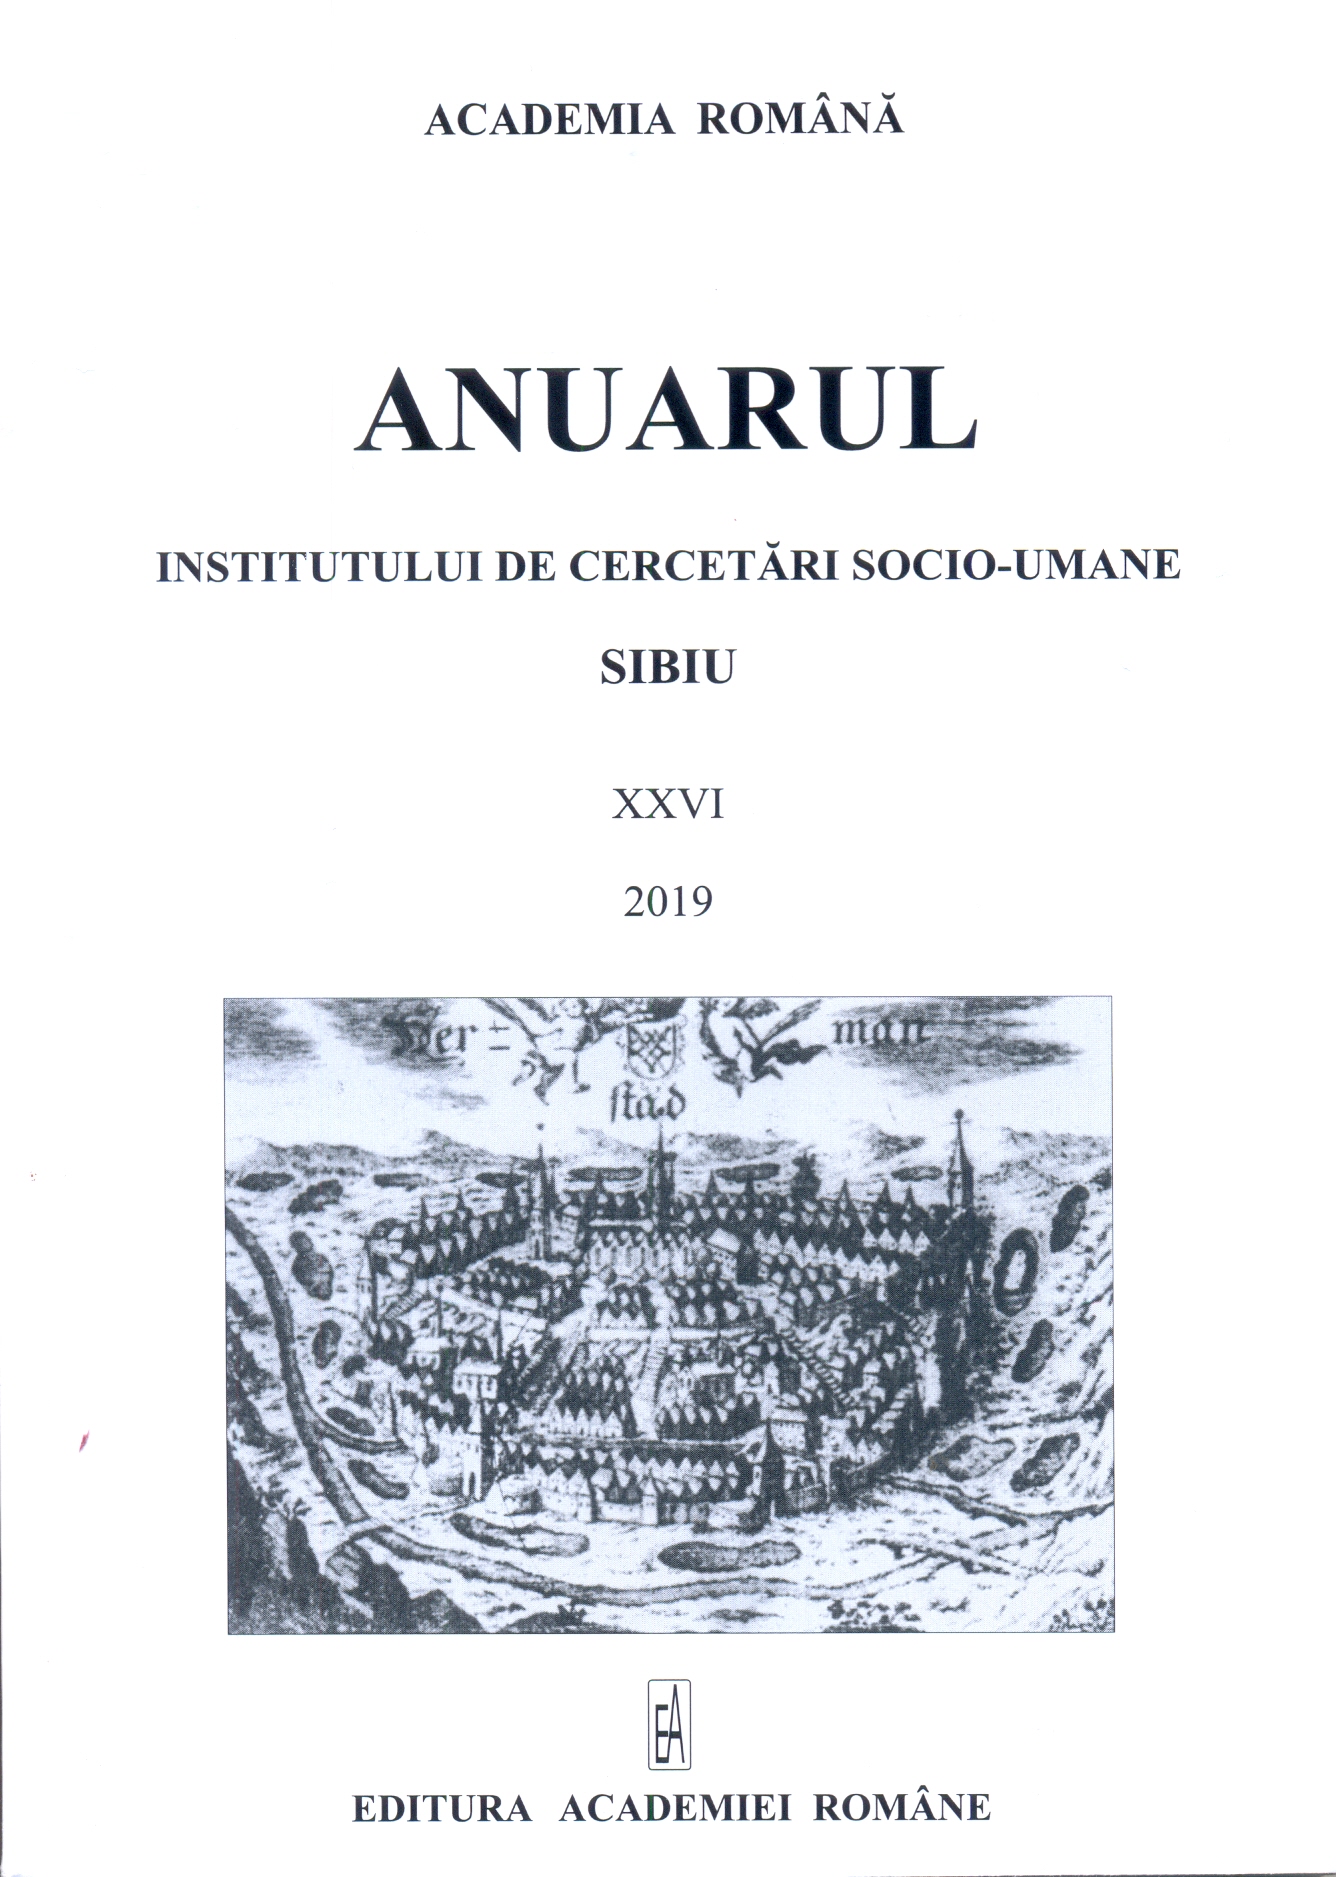 Bibliophile Landmarks in the Collection of the Greek-Catholic Deans from Orăștie Cover Image